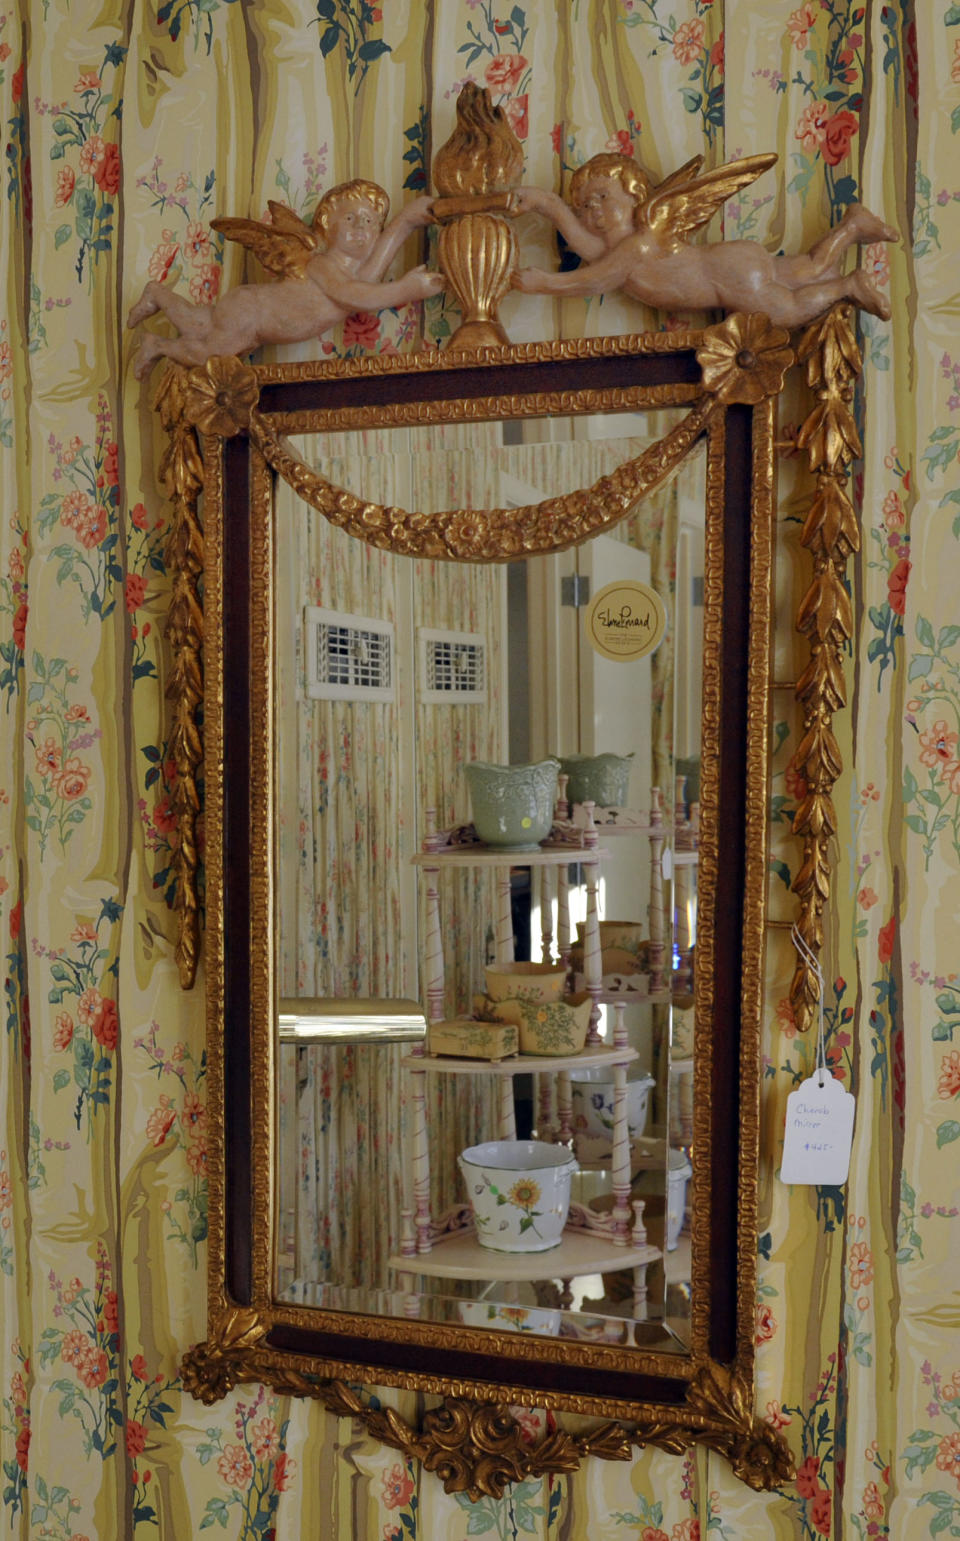 A Cherub Mirror, priced at $ 425.00, hangs on a wall at the home of the late crime novelist Elmore Leonard in Bloomfieeld Townships, Mich.,Thursday, March 6, 2014, the day of an estate sale on his belongings, Thursday, March 6, 2014. (AP Photo/The Detroit News, Charles V. Tines)